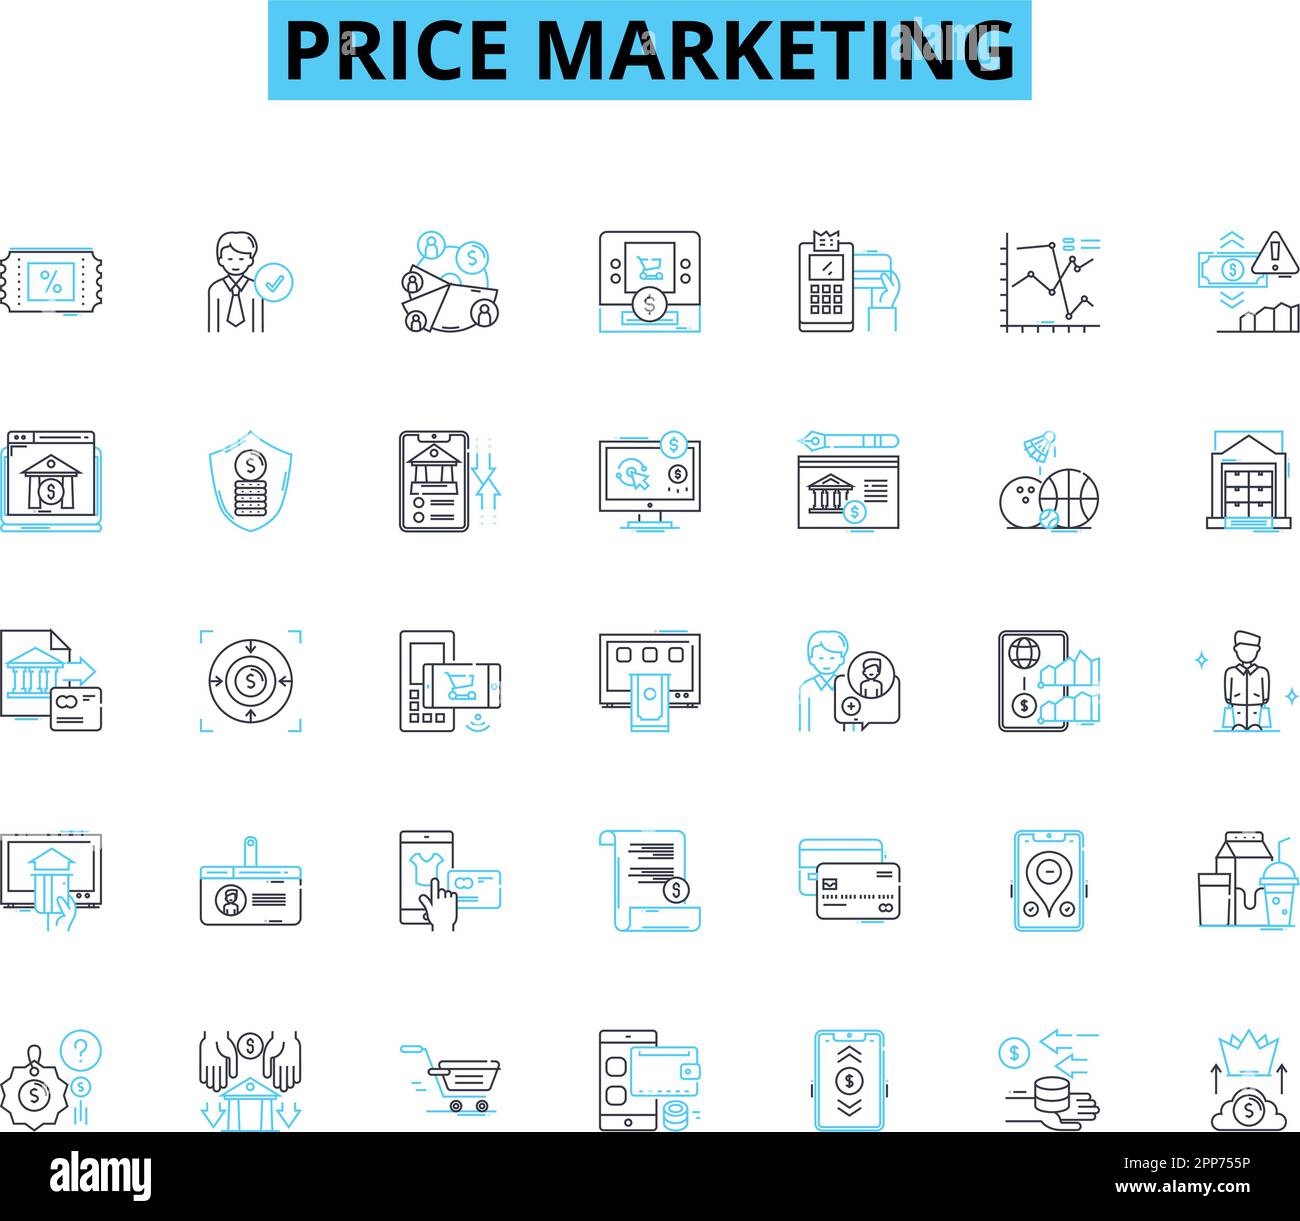 Price marketing linear icons set. Pricing, Value, Discounts, Promotions, Revenue, Costs, Rates line vector and concept signs. ROI,Elasticity,Bargains Stock Vector